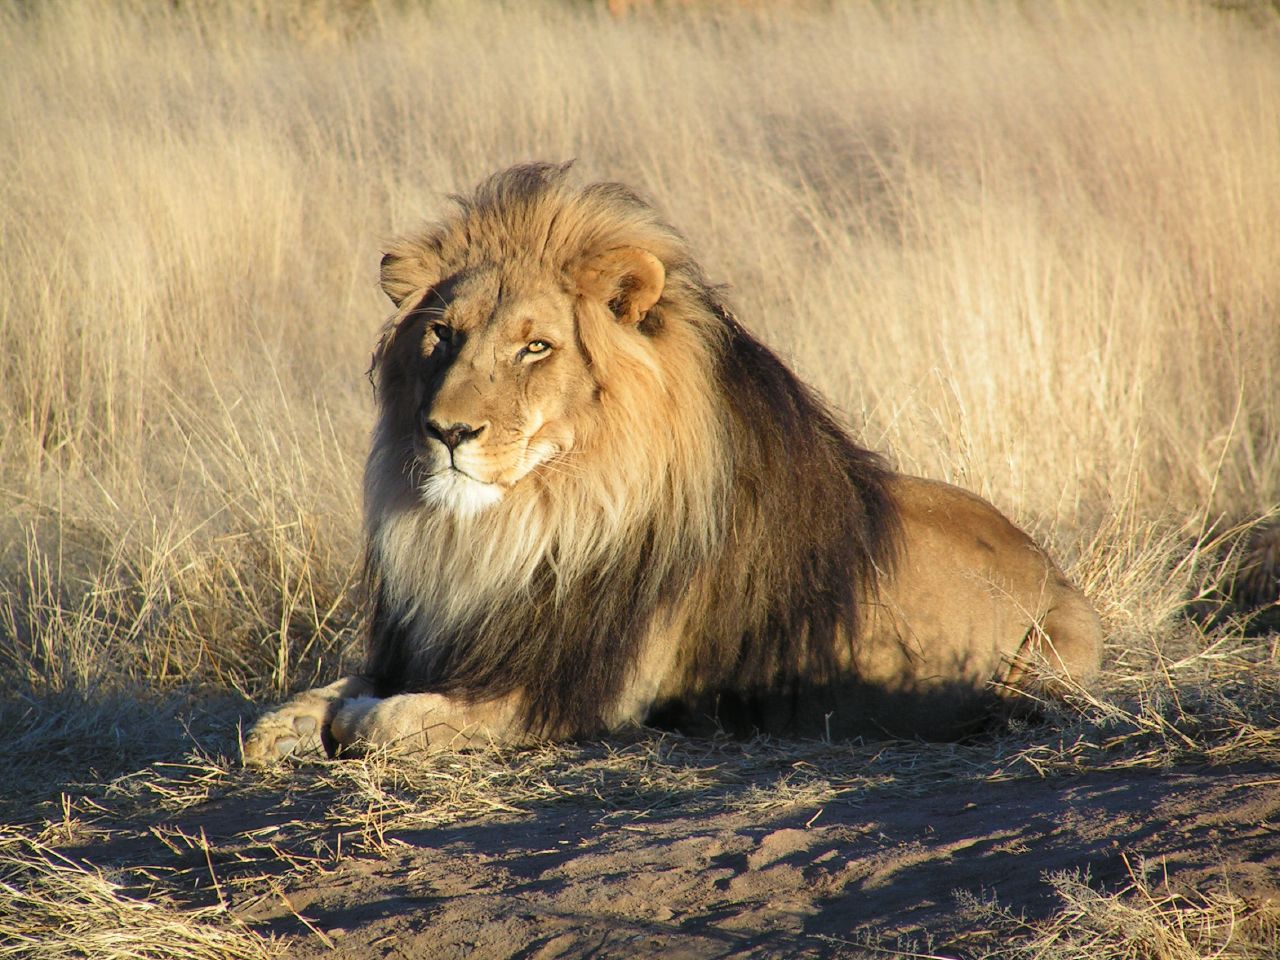 File:Lion waiting in Namibia.jpg - Wikimedia Commons